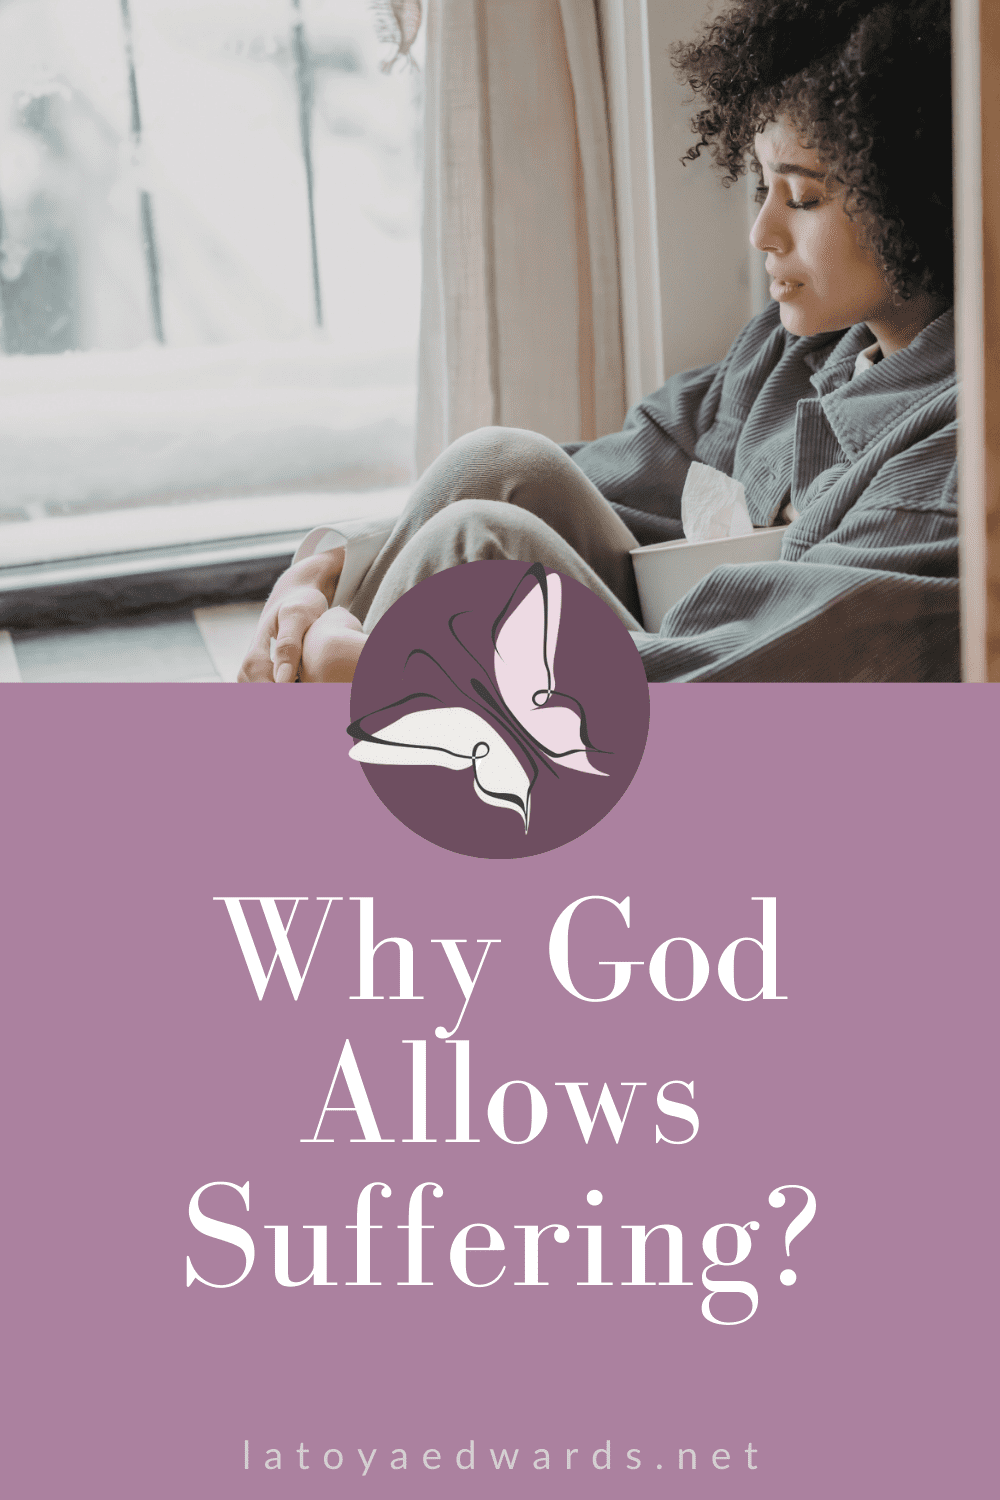 Are you why God allows suffering? It can be really difficult to have faith in God when your life is really hard. Waiting on God to answer prayers can leave you feeling frustrated, abandoned or ignored. Understanding the purpose behind your pain is helpful for finding hope while trying to trust God during hard times. If you need some encouragement visit the full blog post to read more.